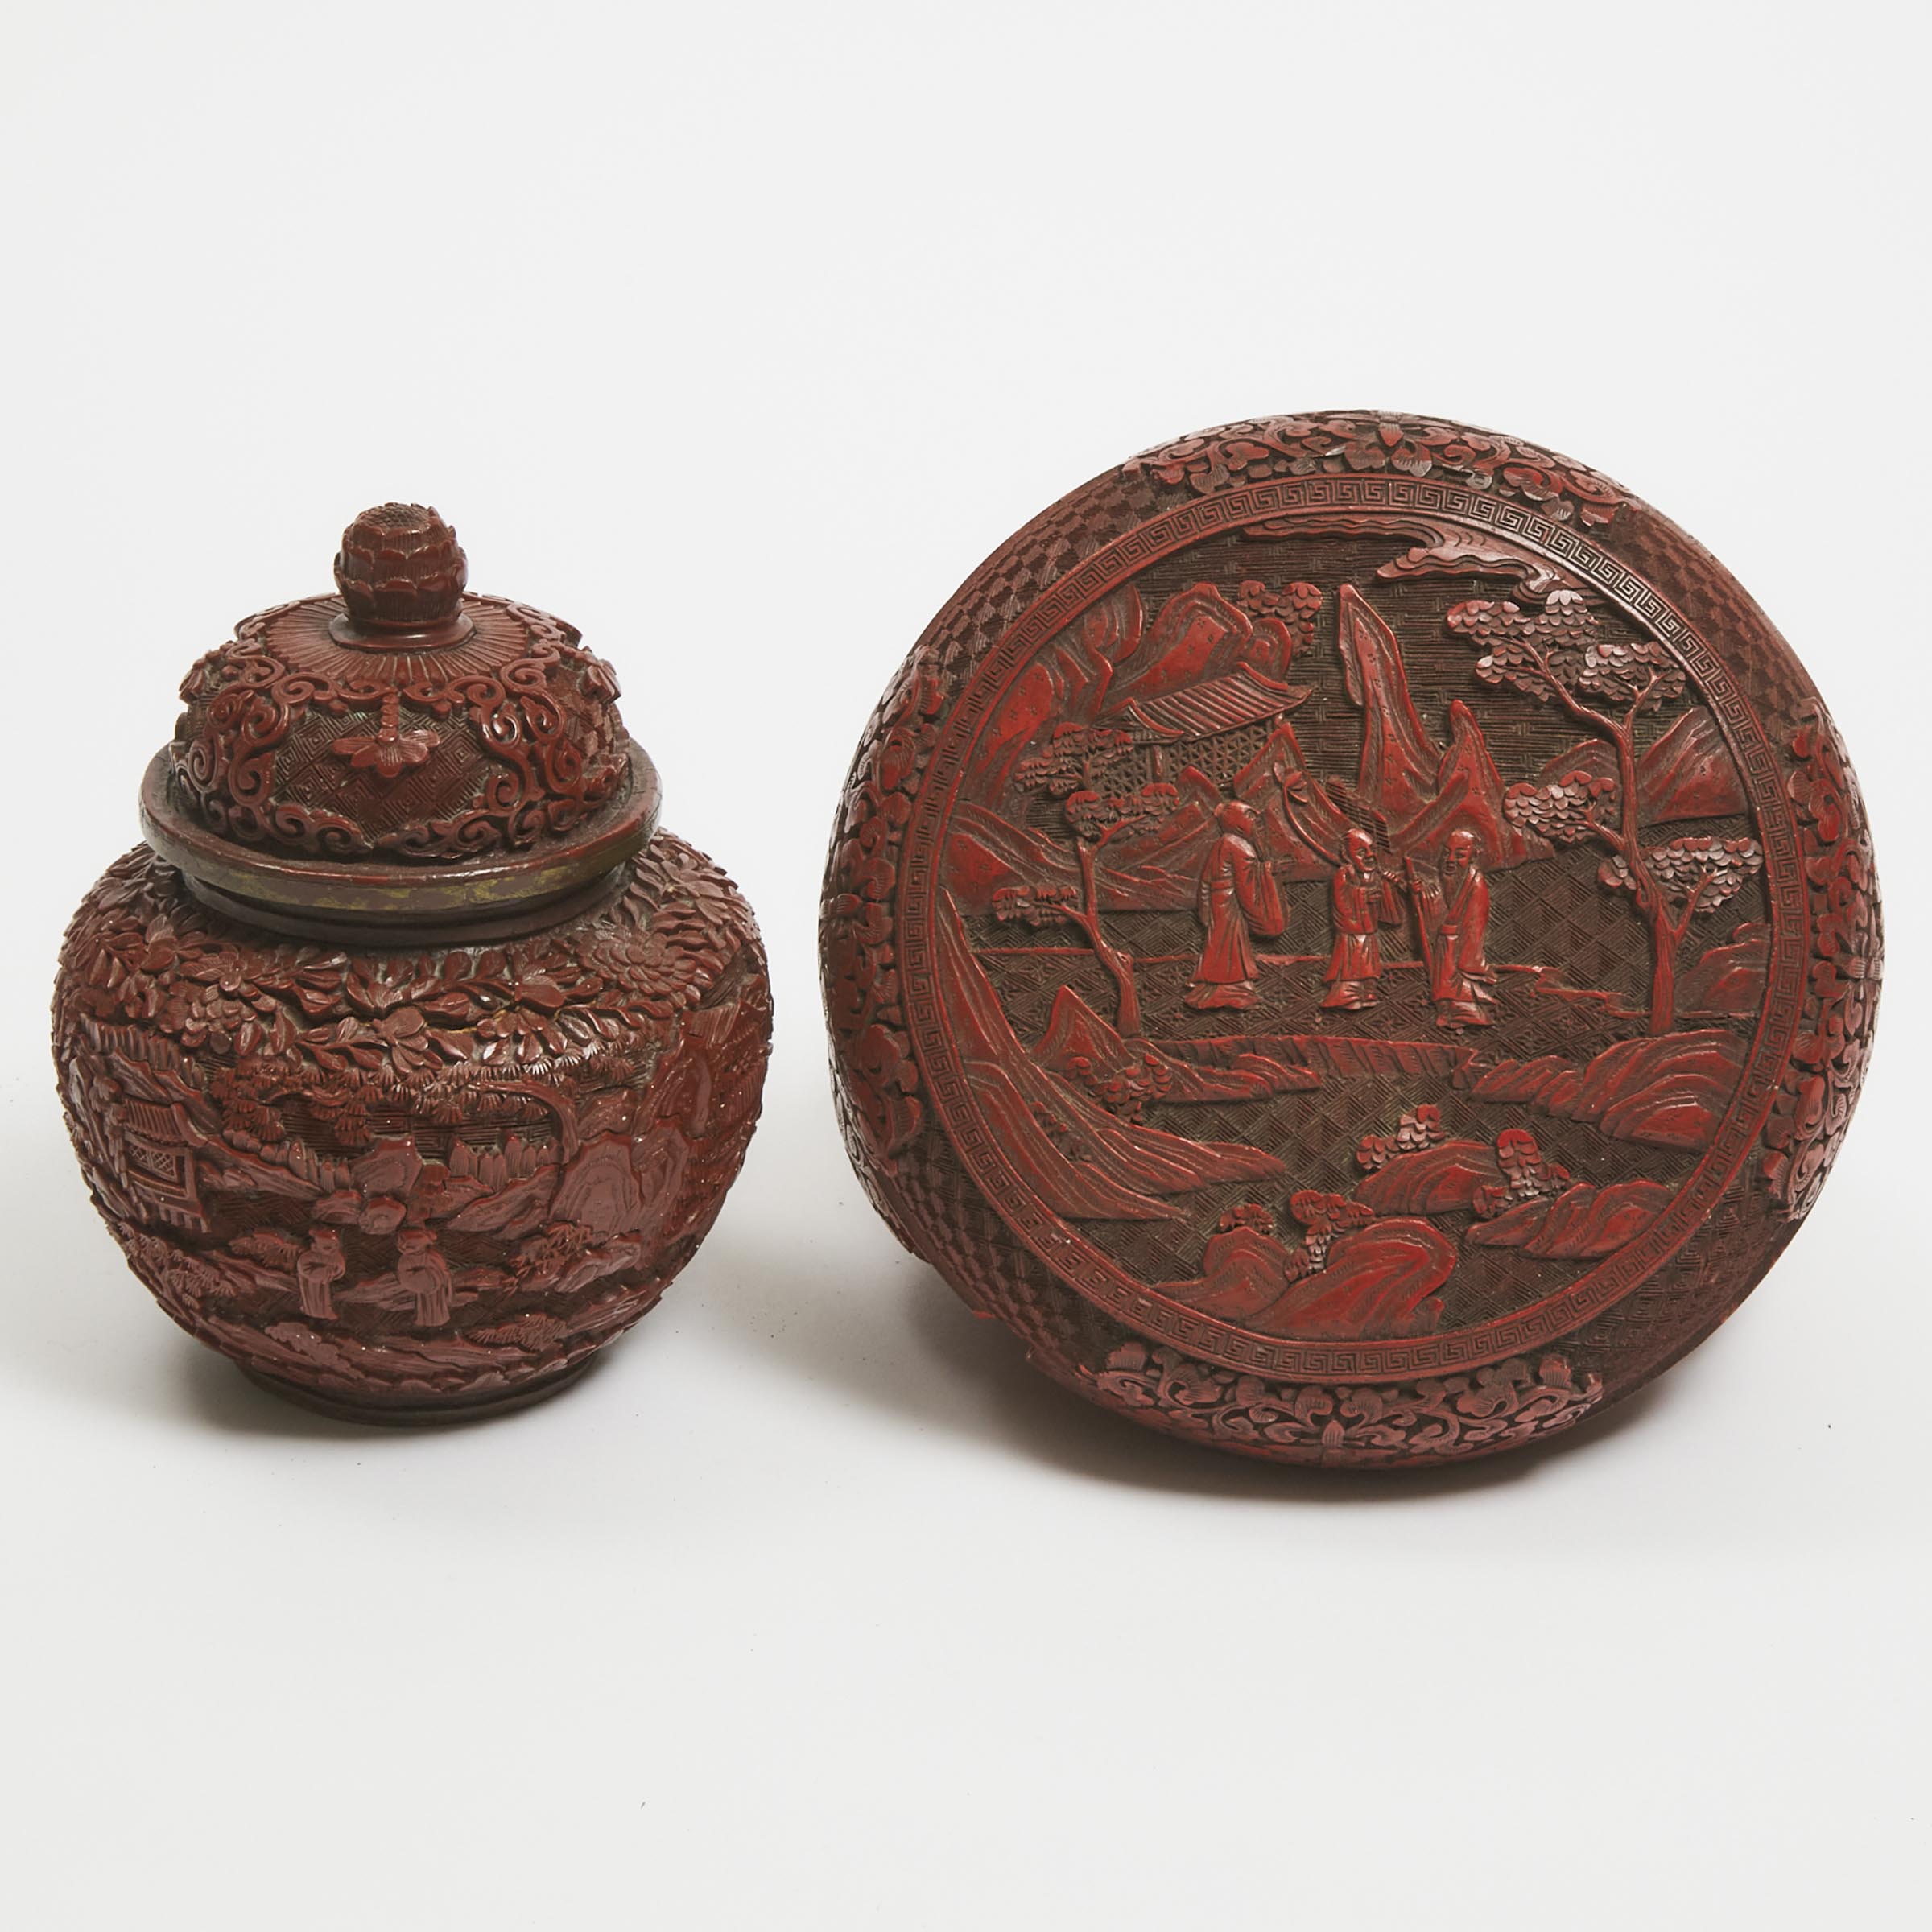 A Red Lacquer Carved Box and Cover, Together With a Lidded Jar, 19th Century